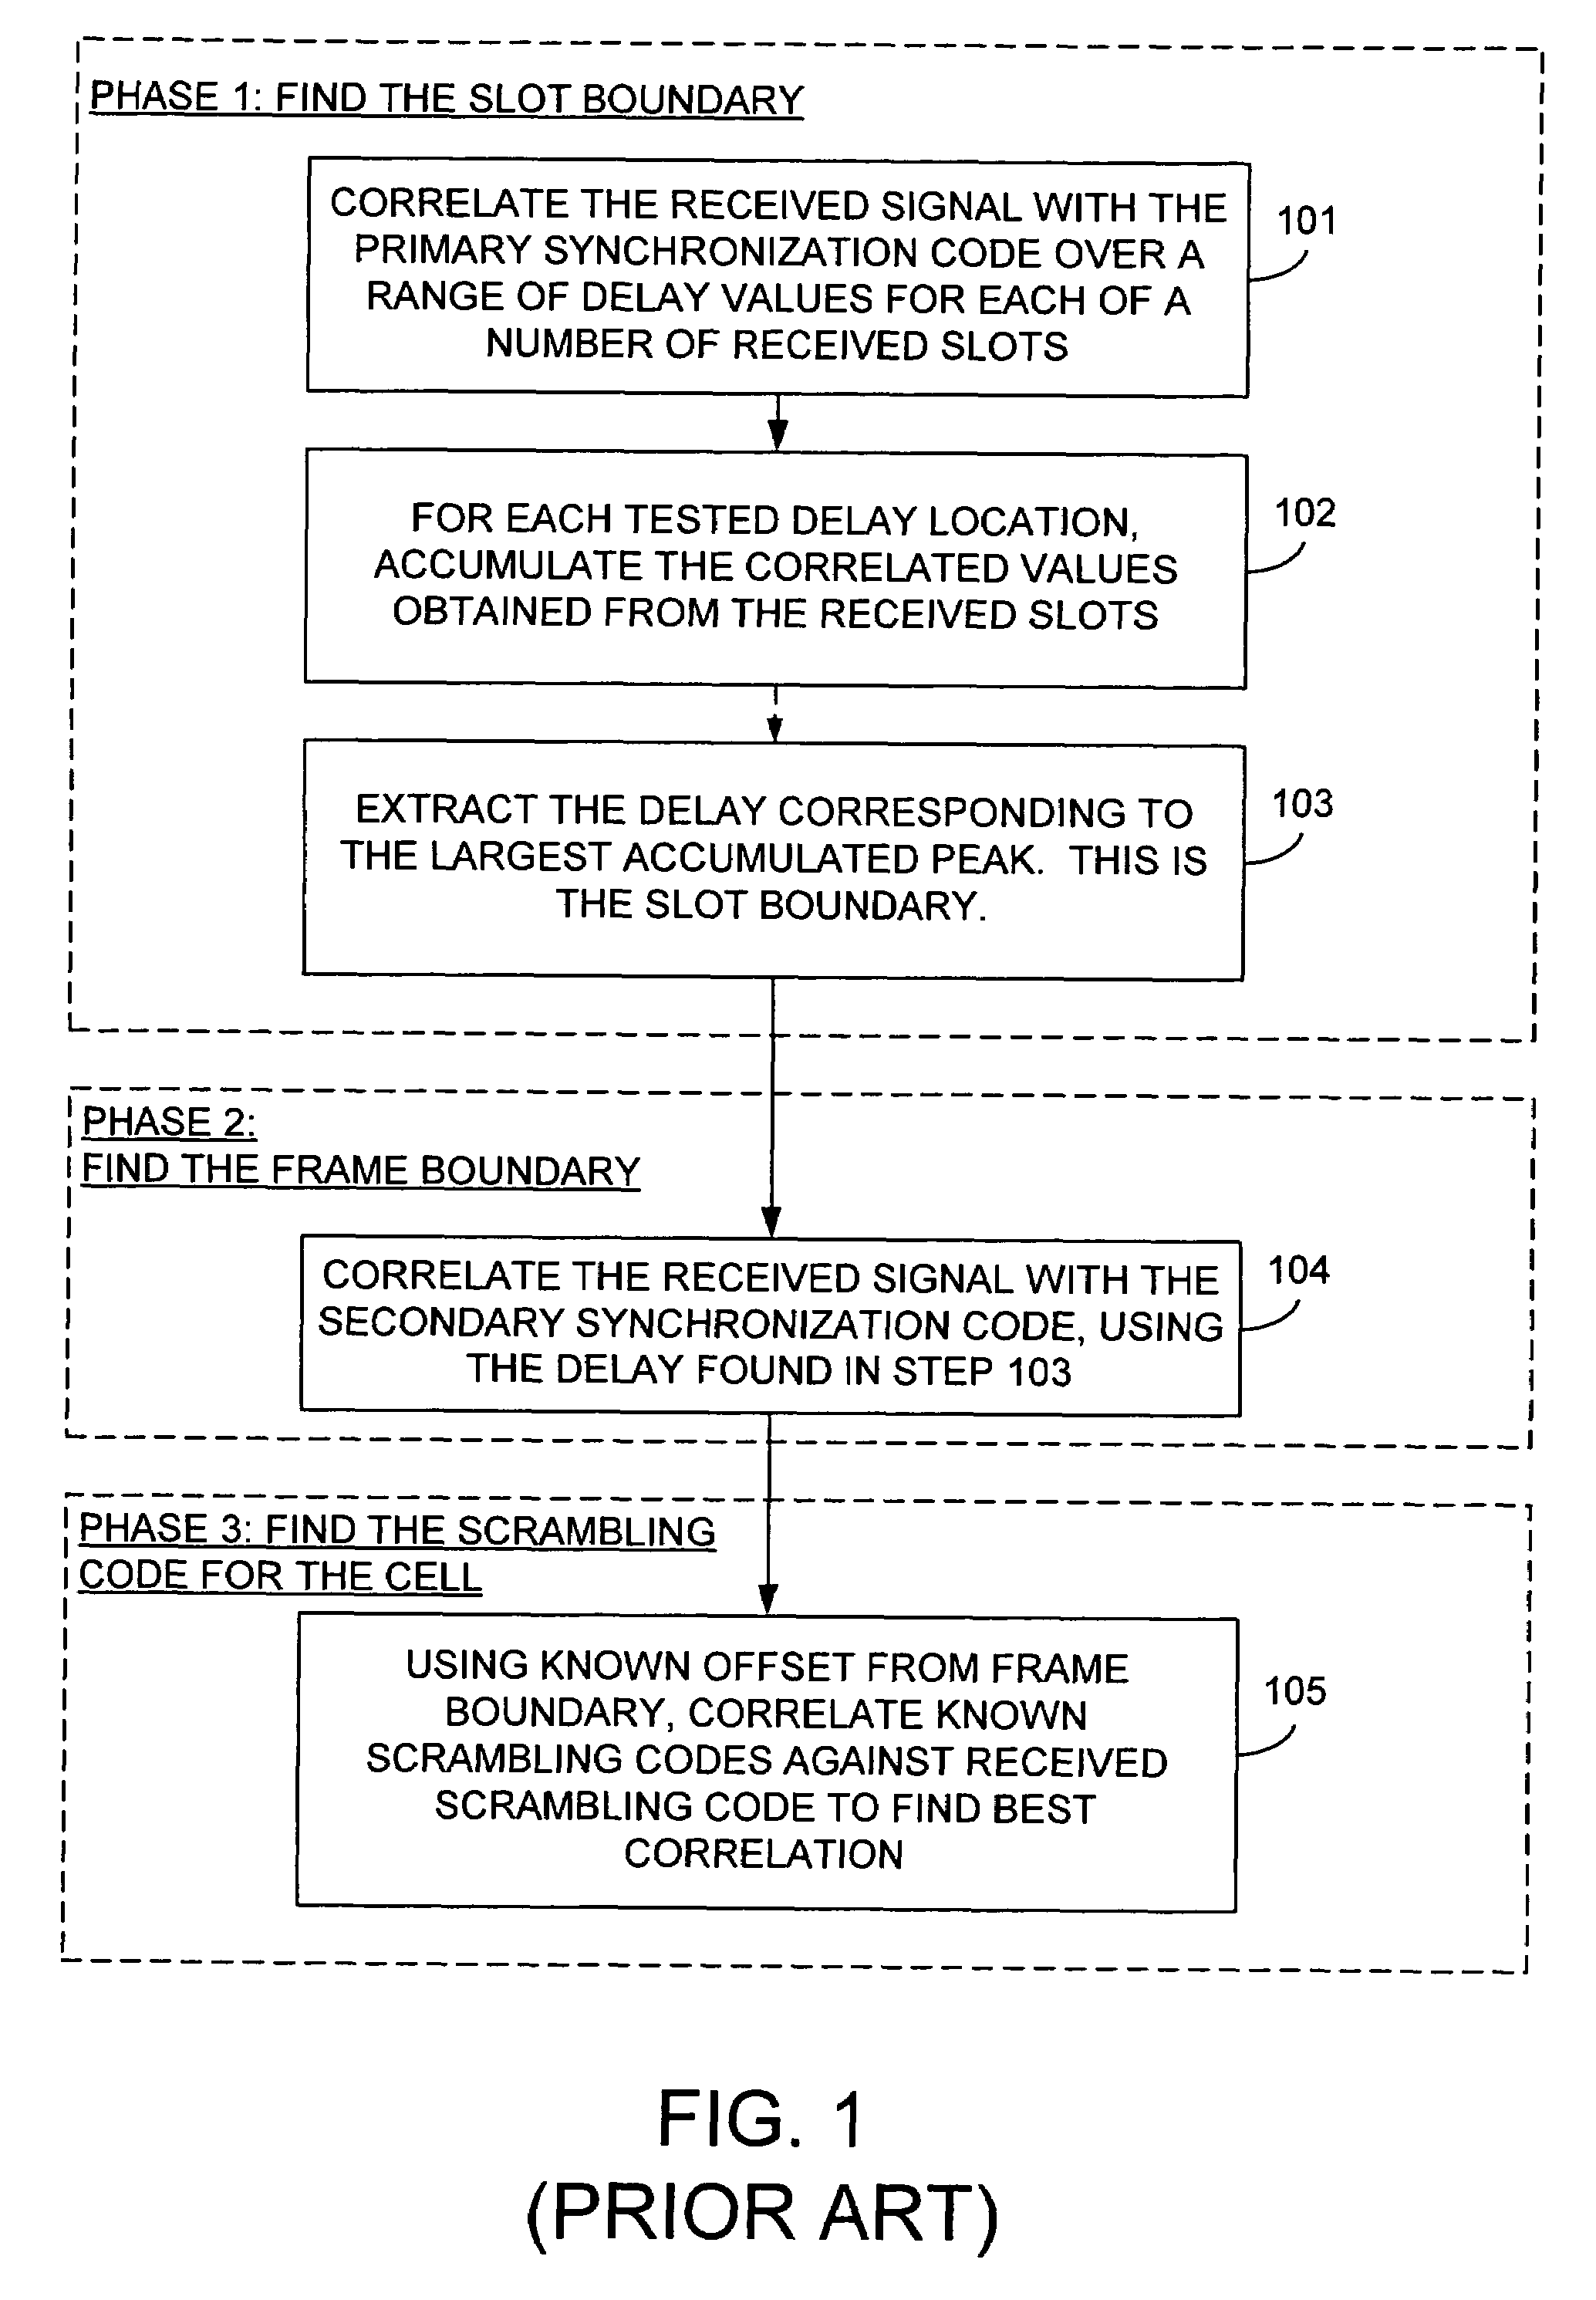 Filtering multipath propagation delay values for use in a mobile communications system